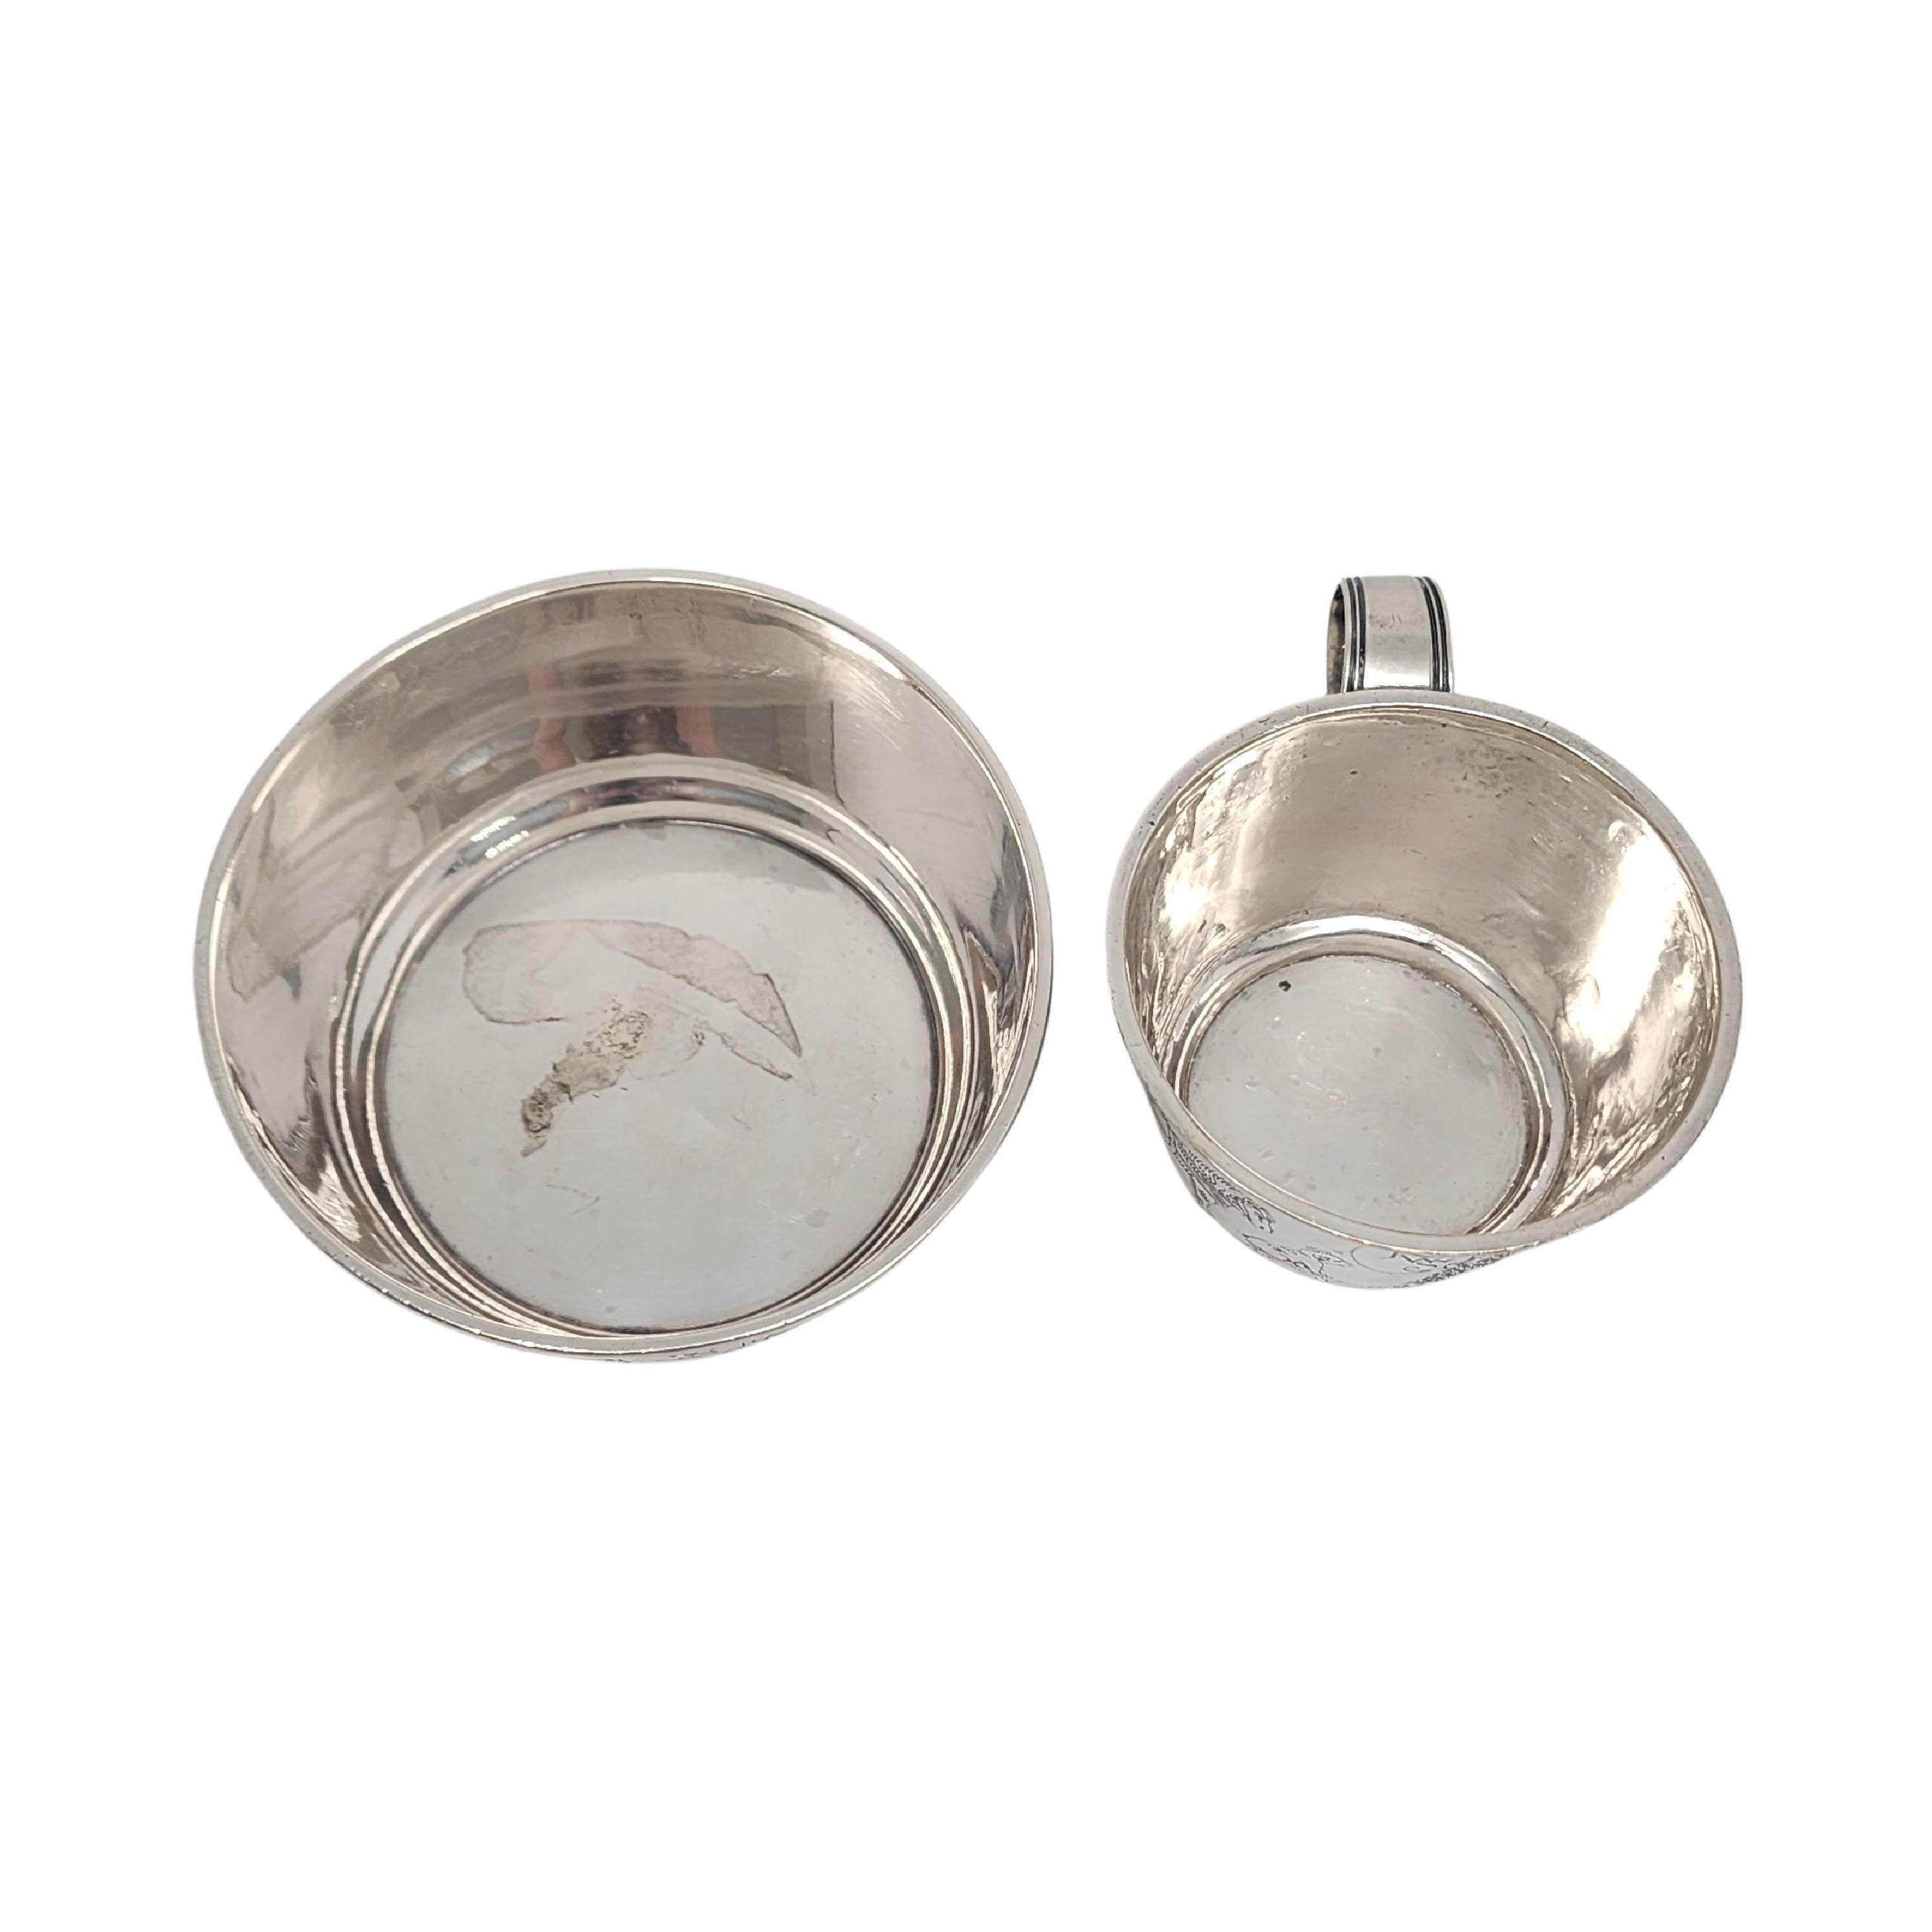 Women's or Men's R Blackinton & Co Sterling Silver Child Bowl and Cup w/Mono #15714 For Sale